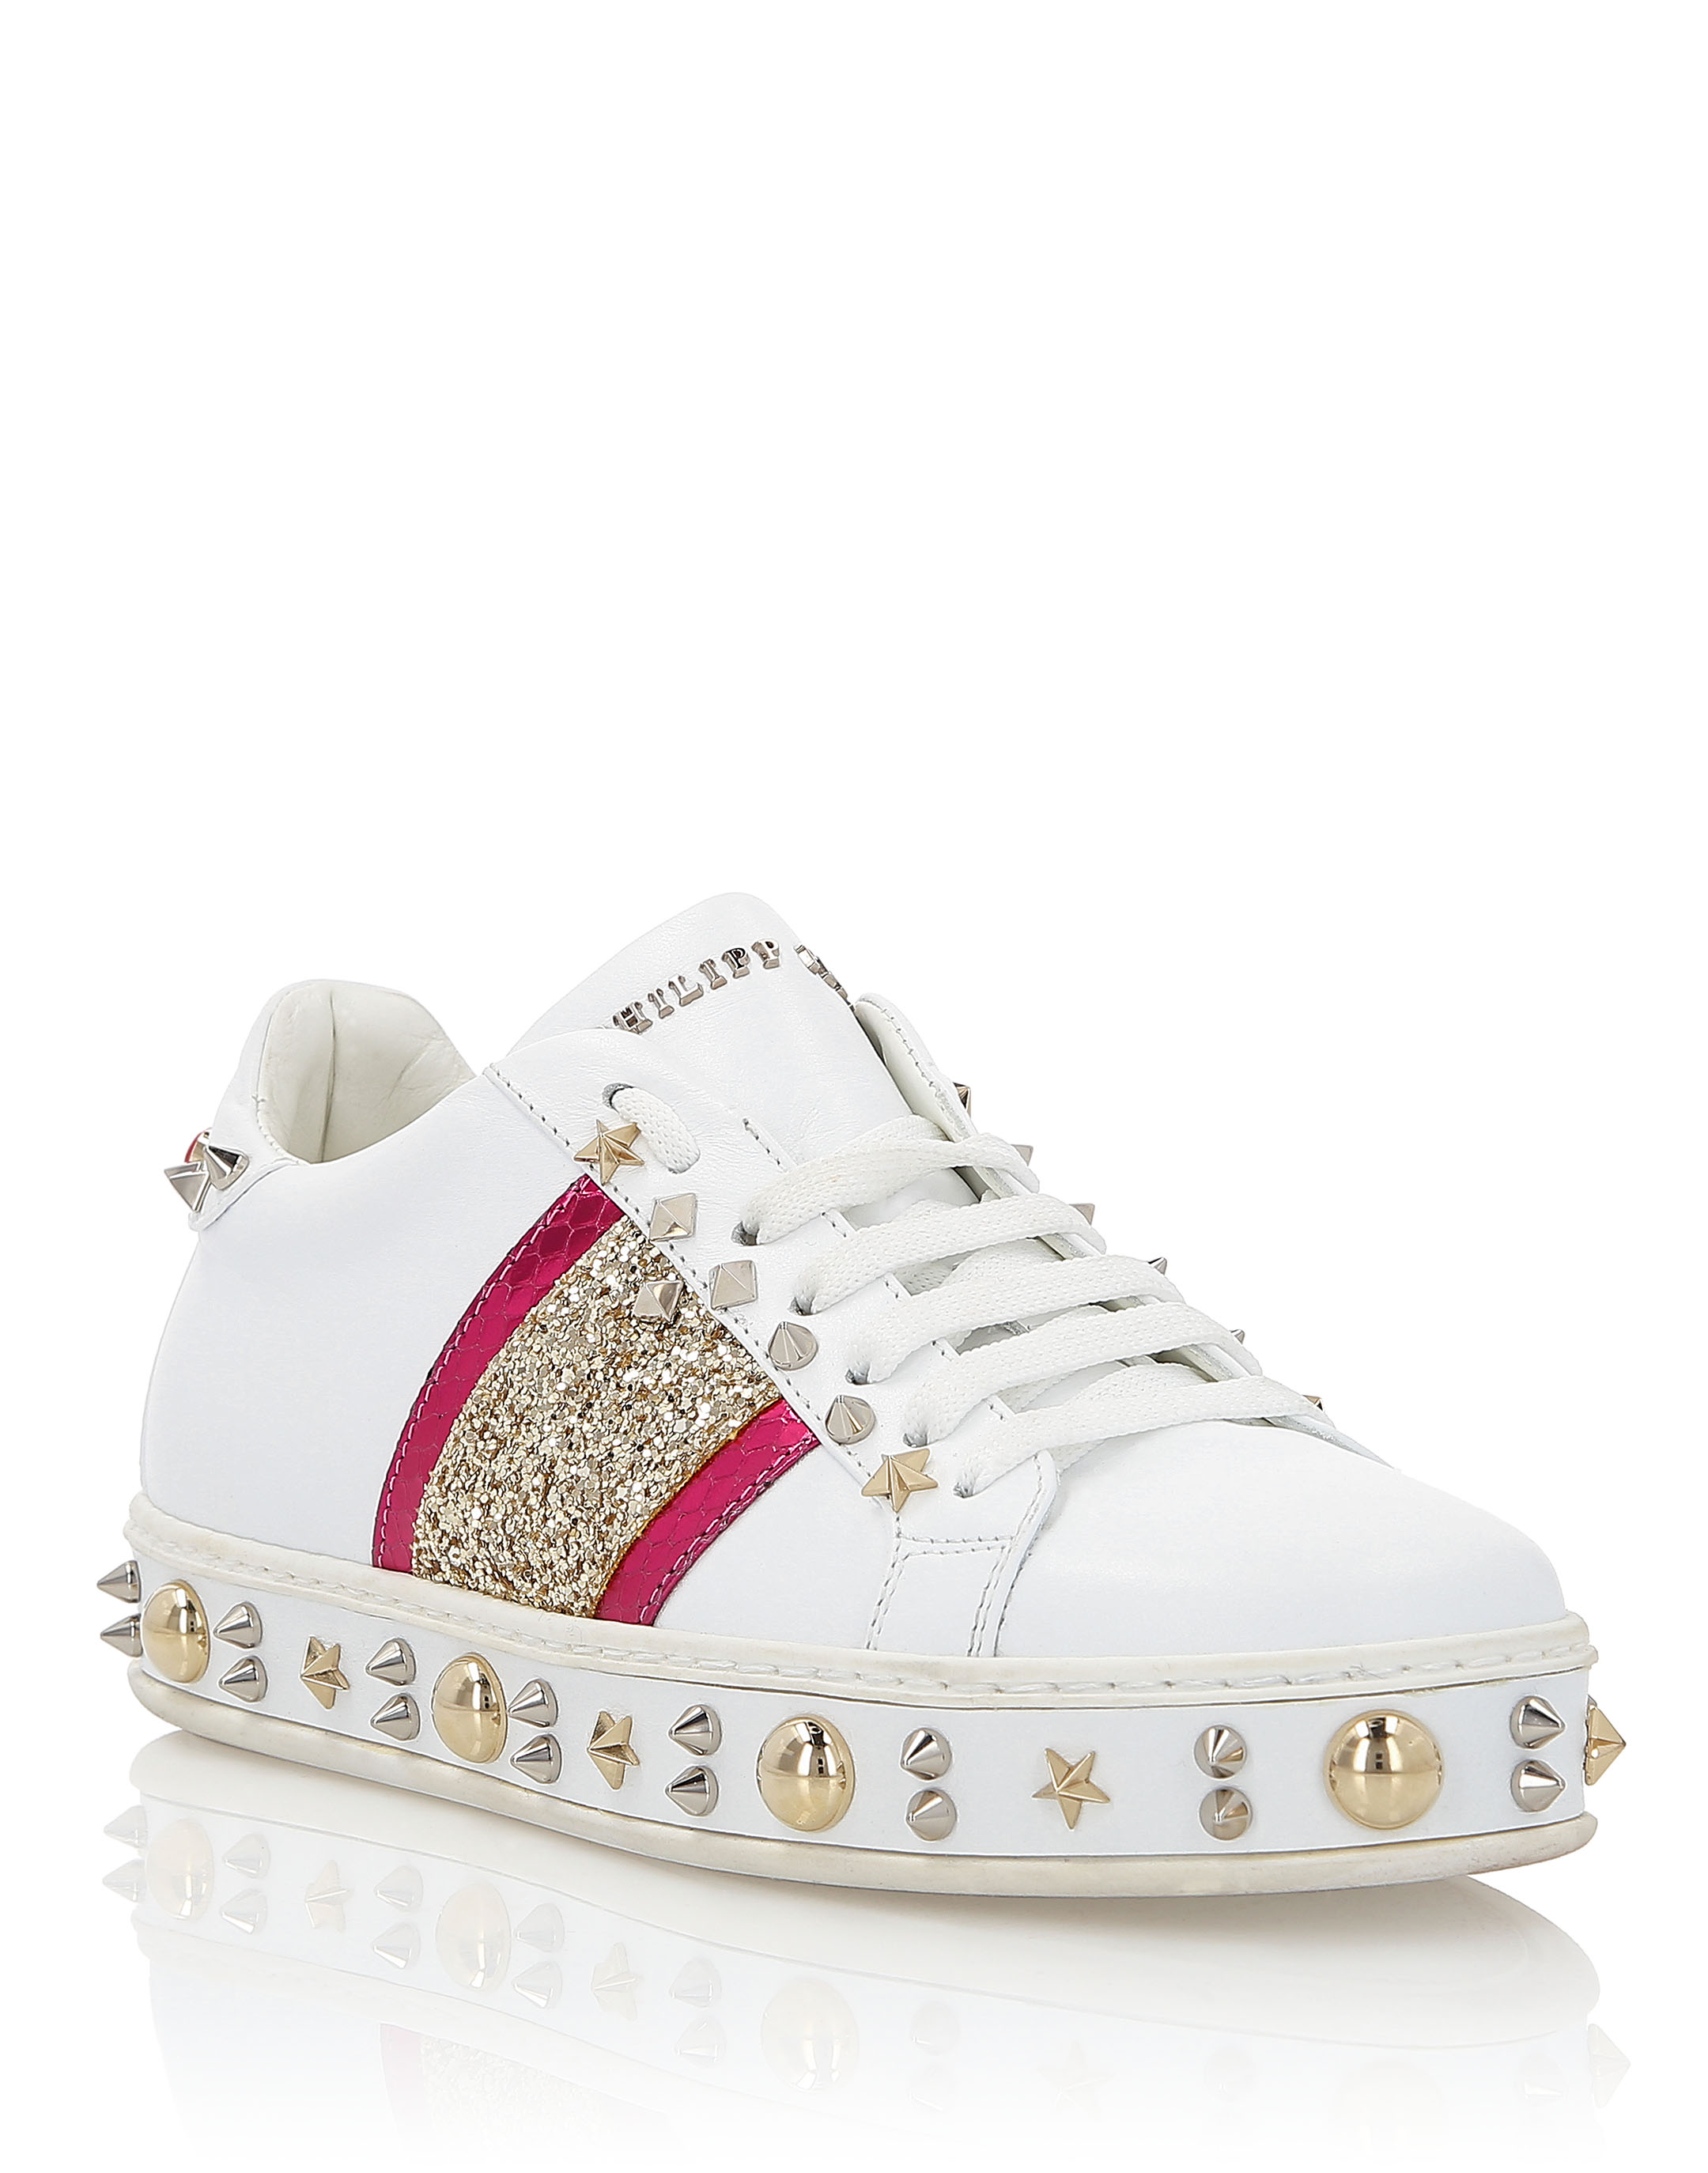 Lo-Top Sneakers "Exclusive" | Philipp Plein Outlet